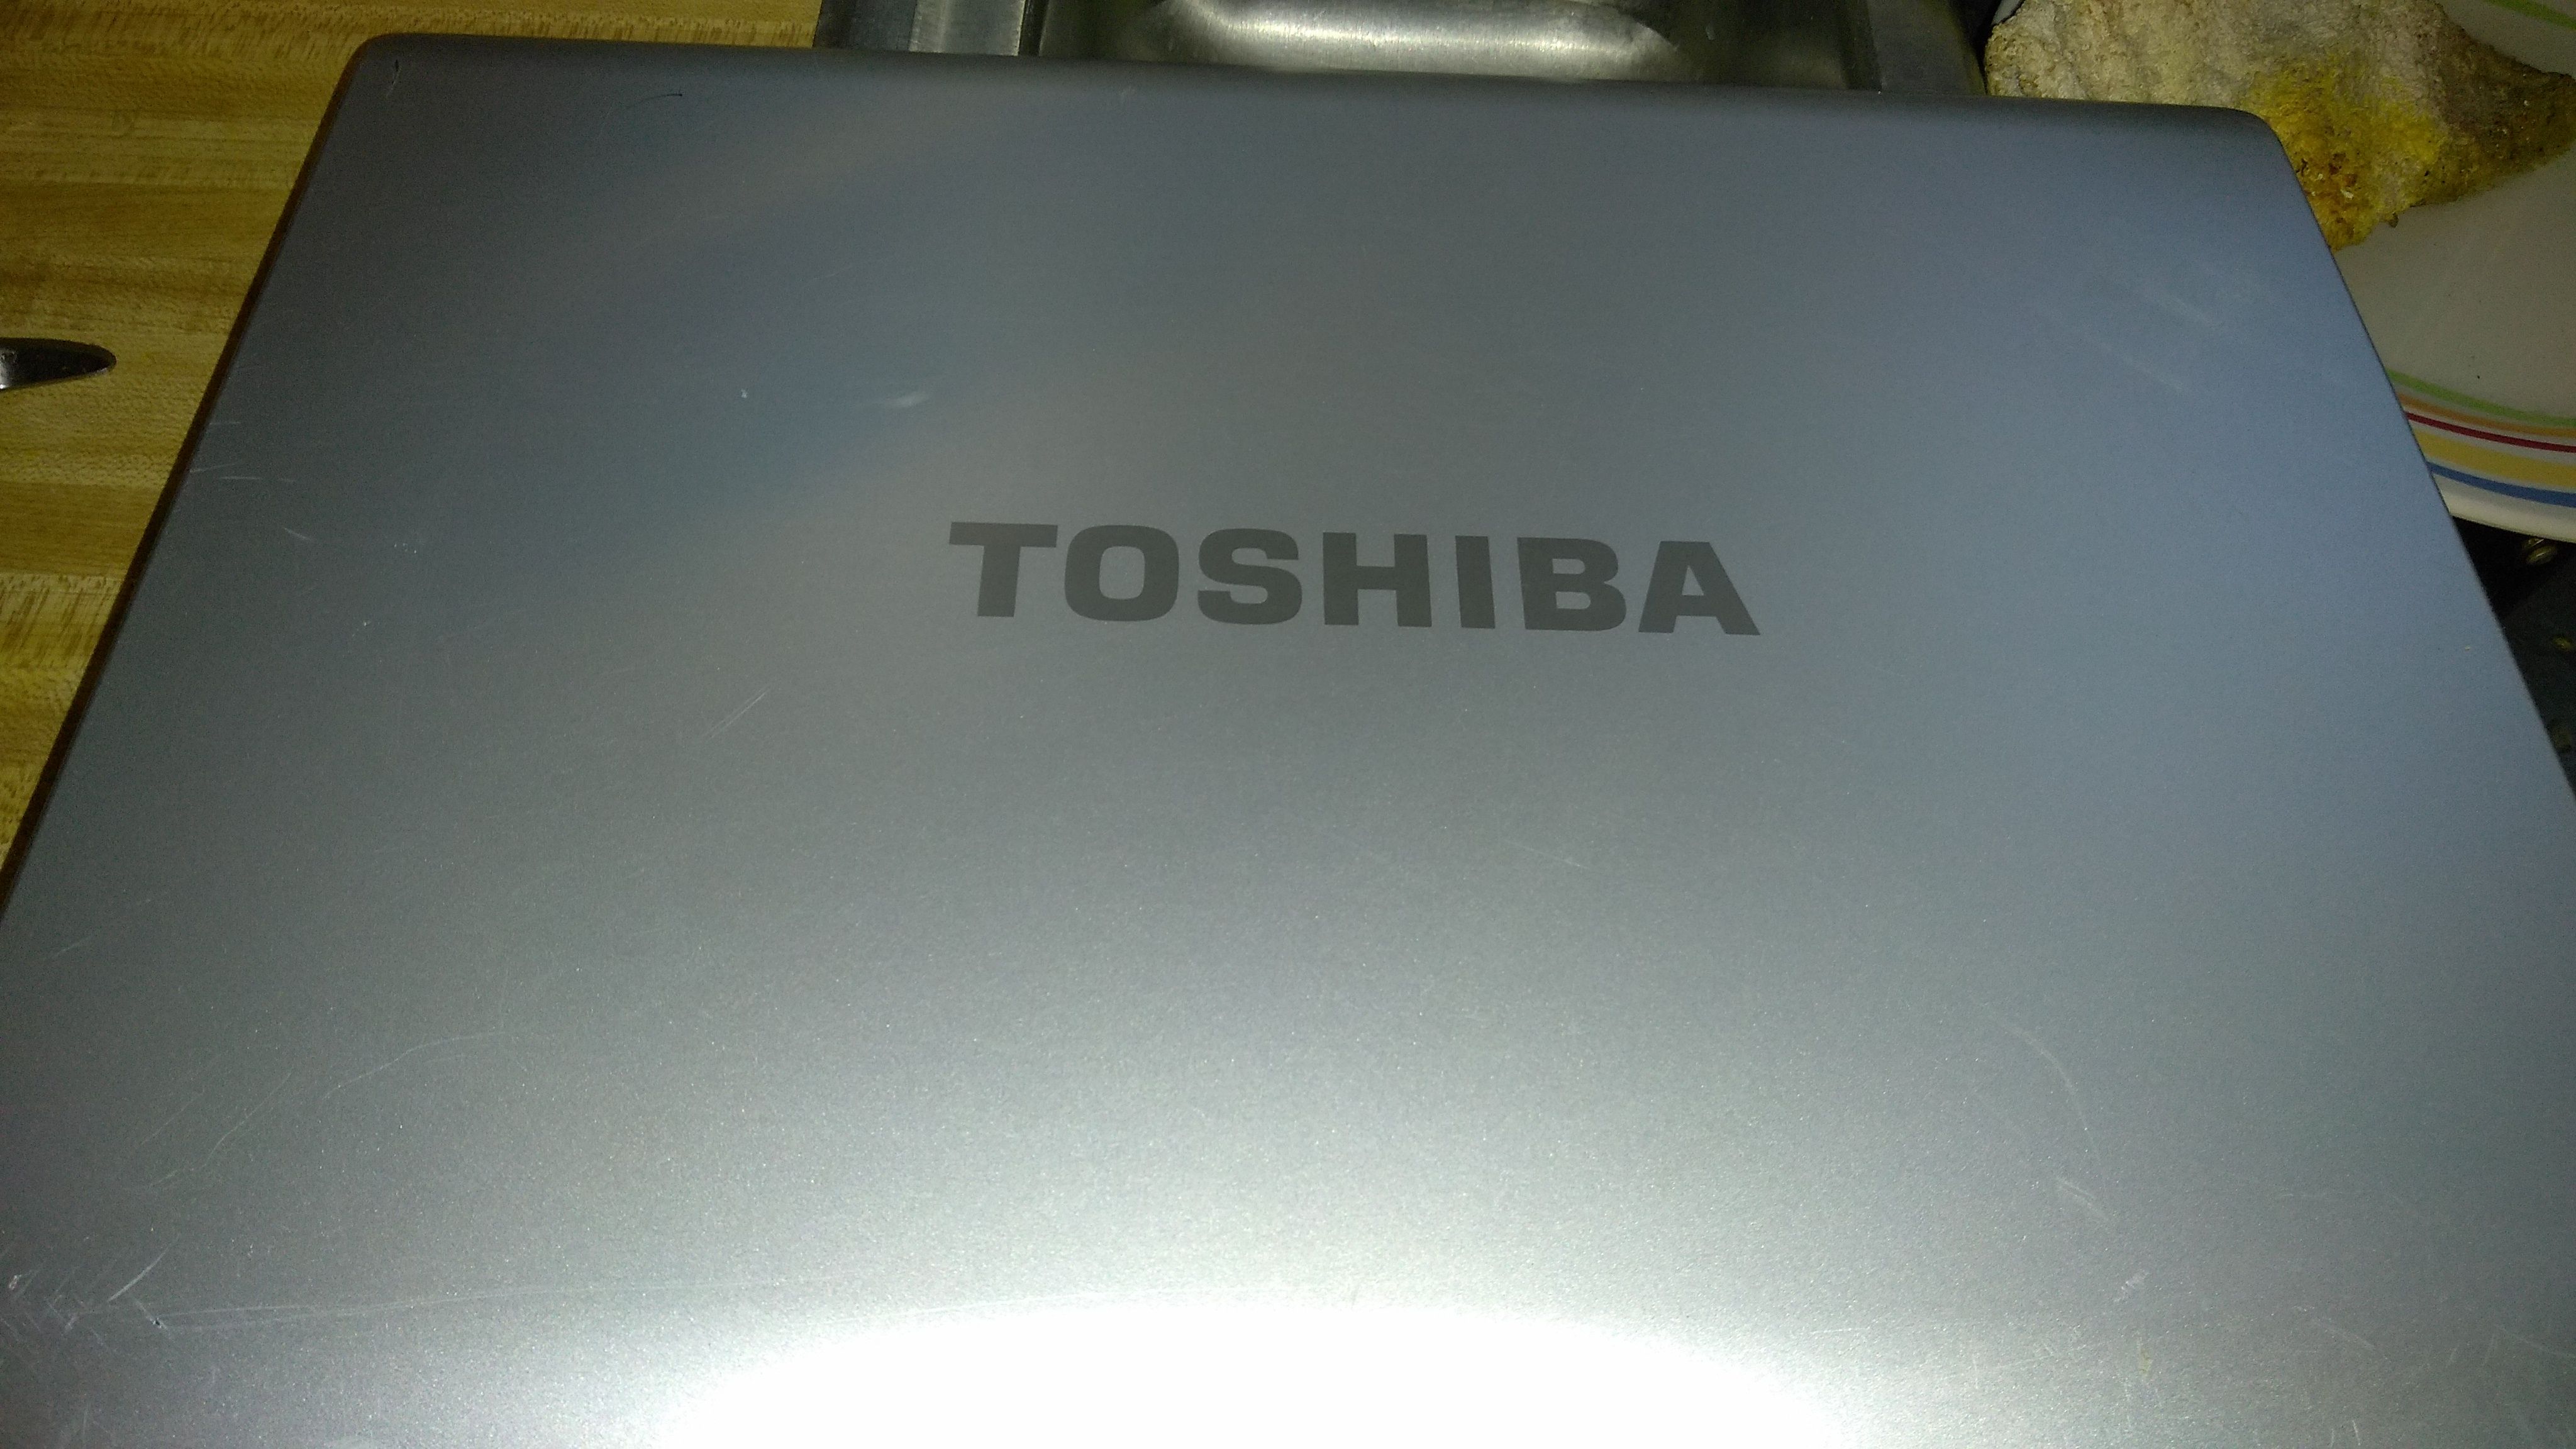 Toshiba laptop, no charger, missing 5 keys, but works